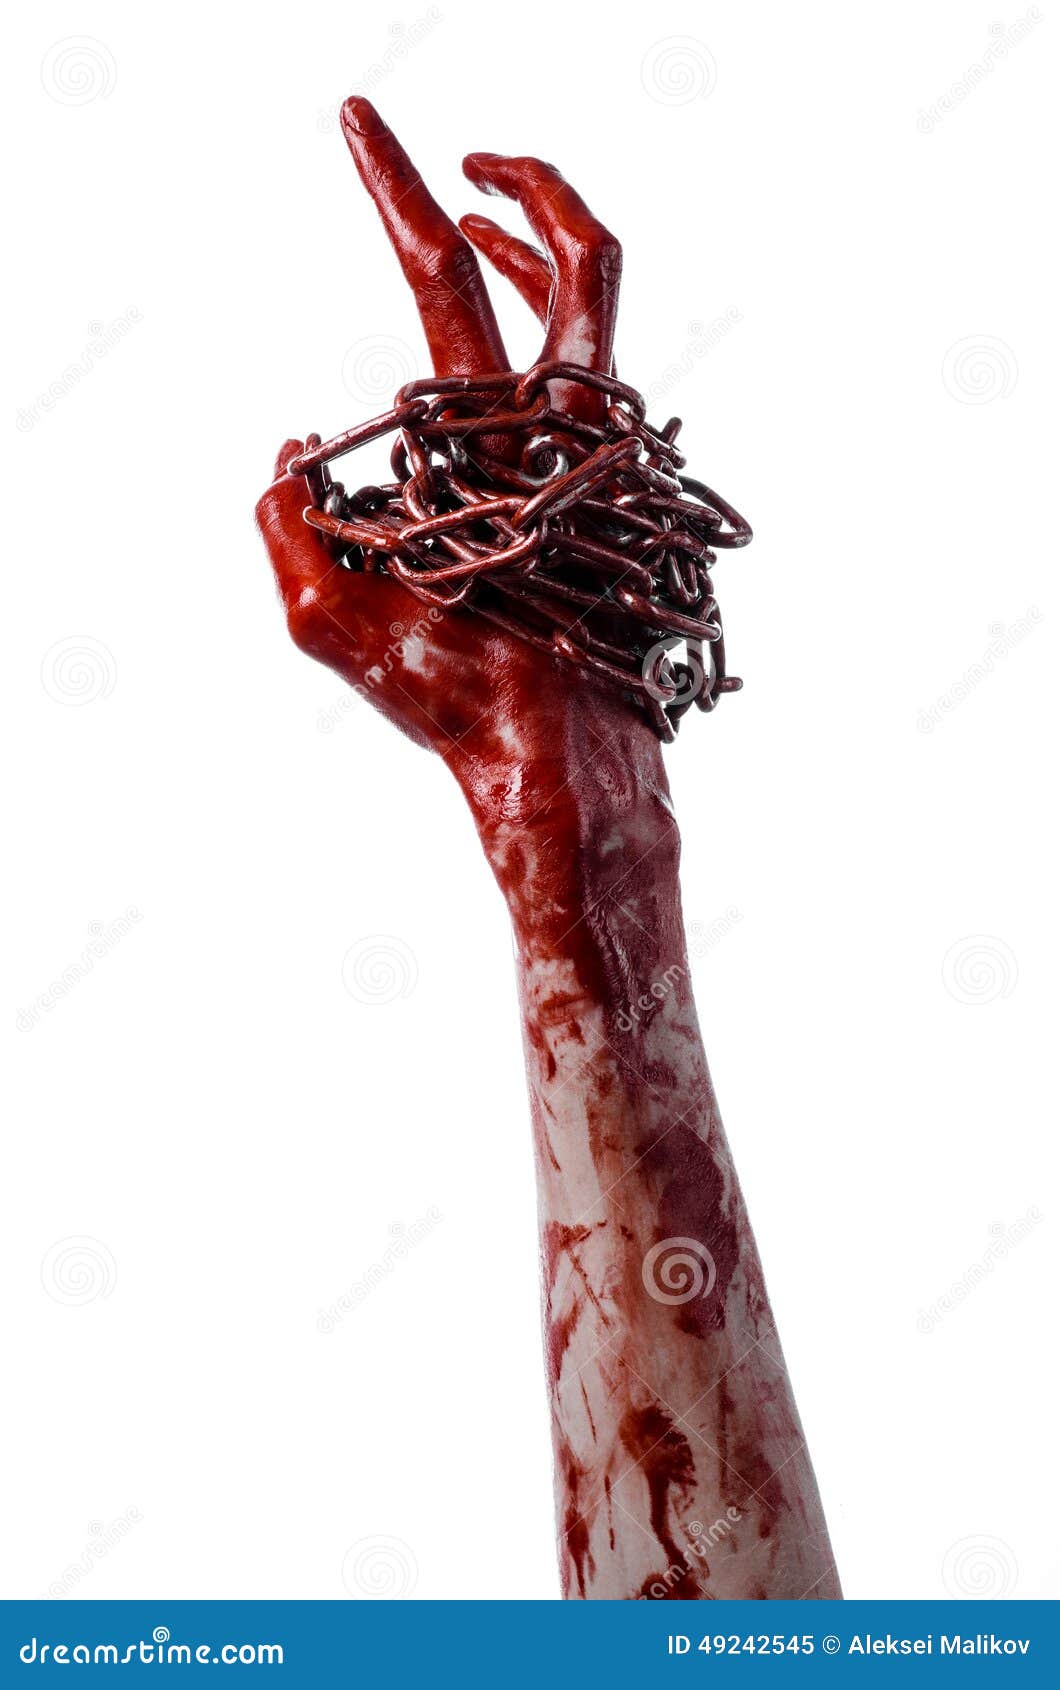 clipart bloody hand - photo #34